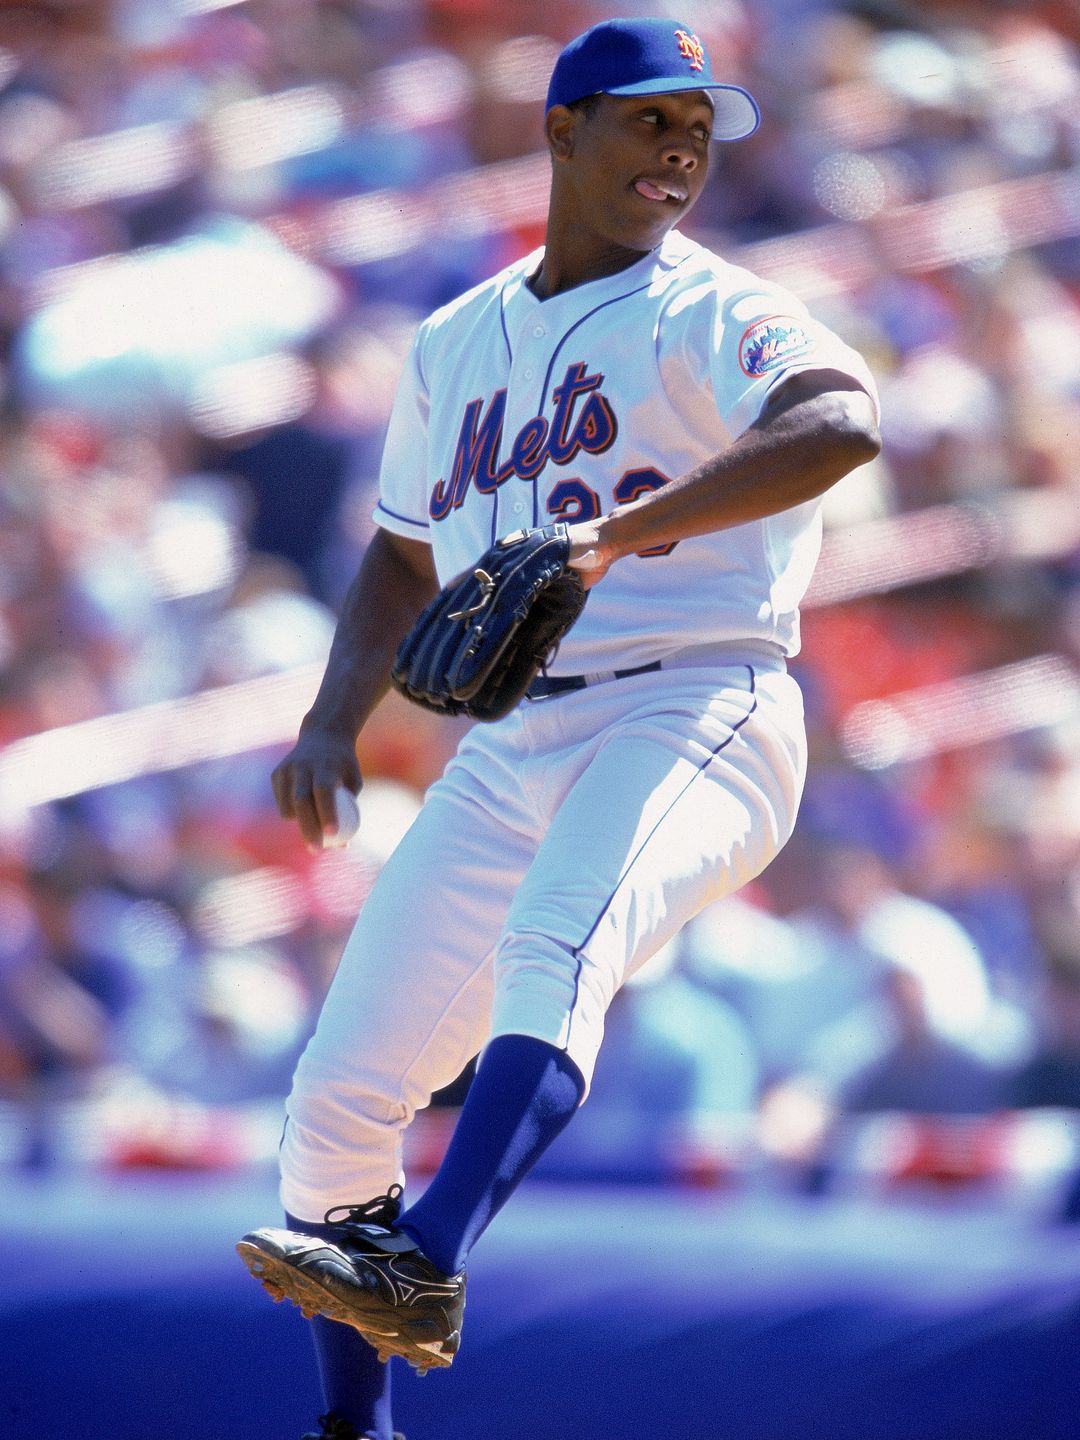 Pat Mahomes pitching for the New York Mets in 2000